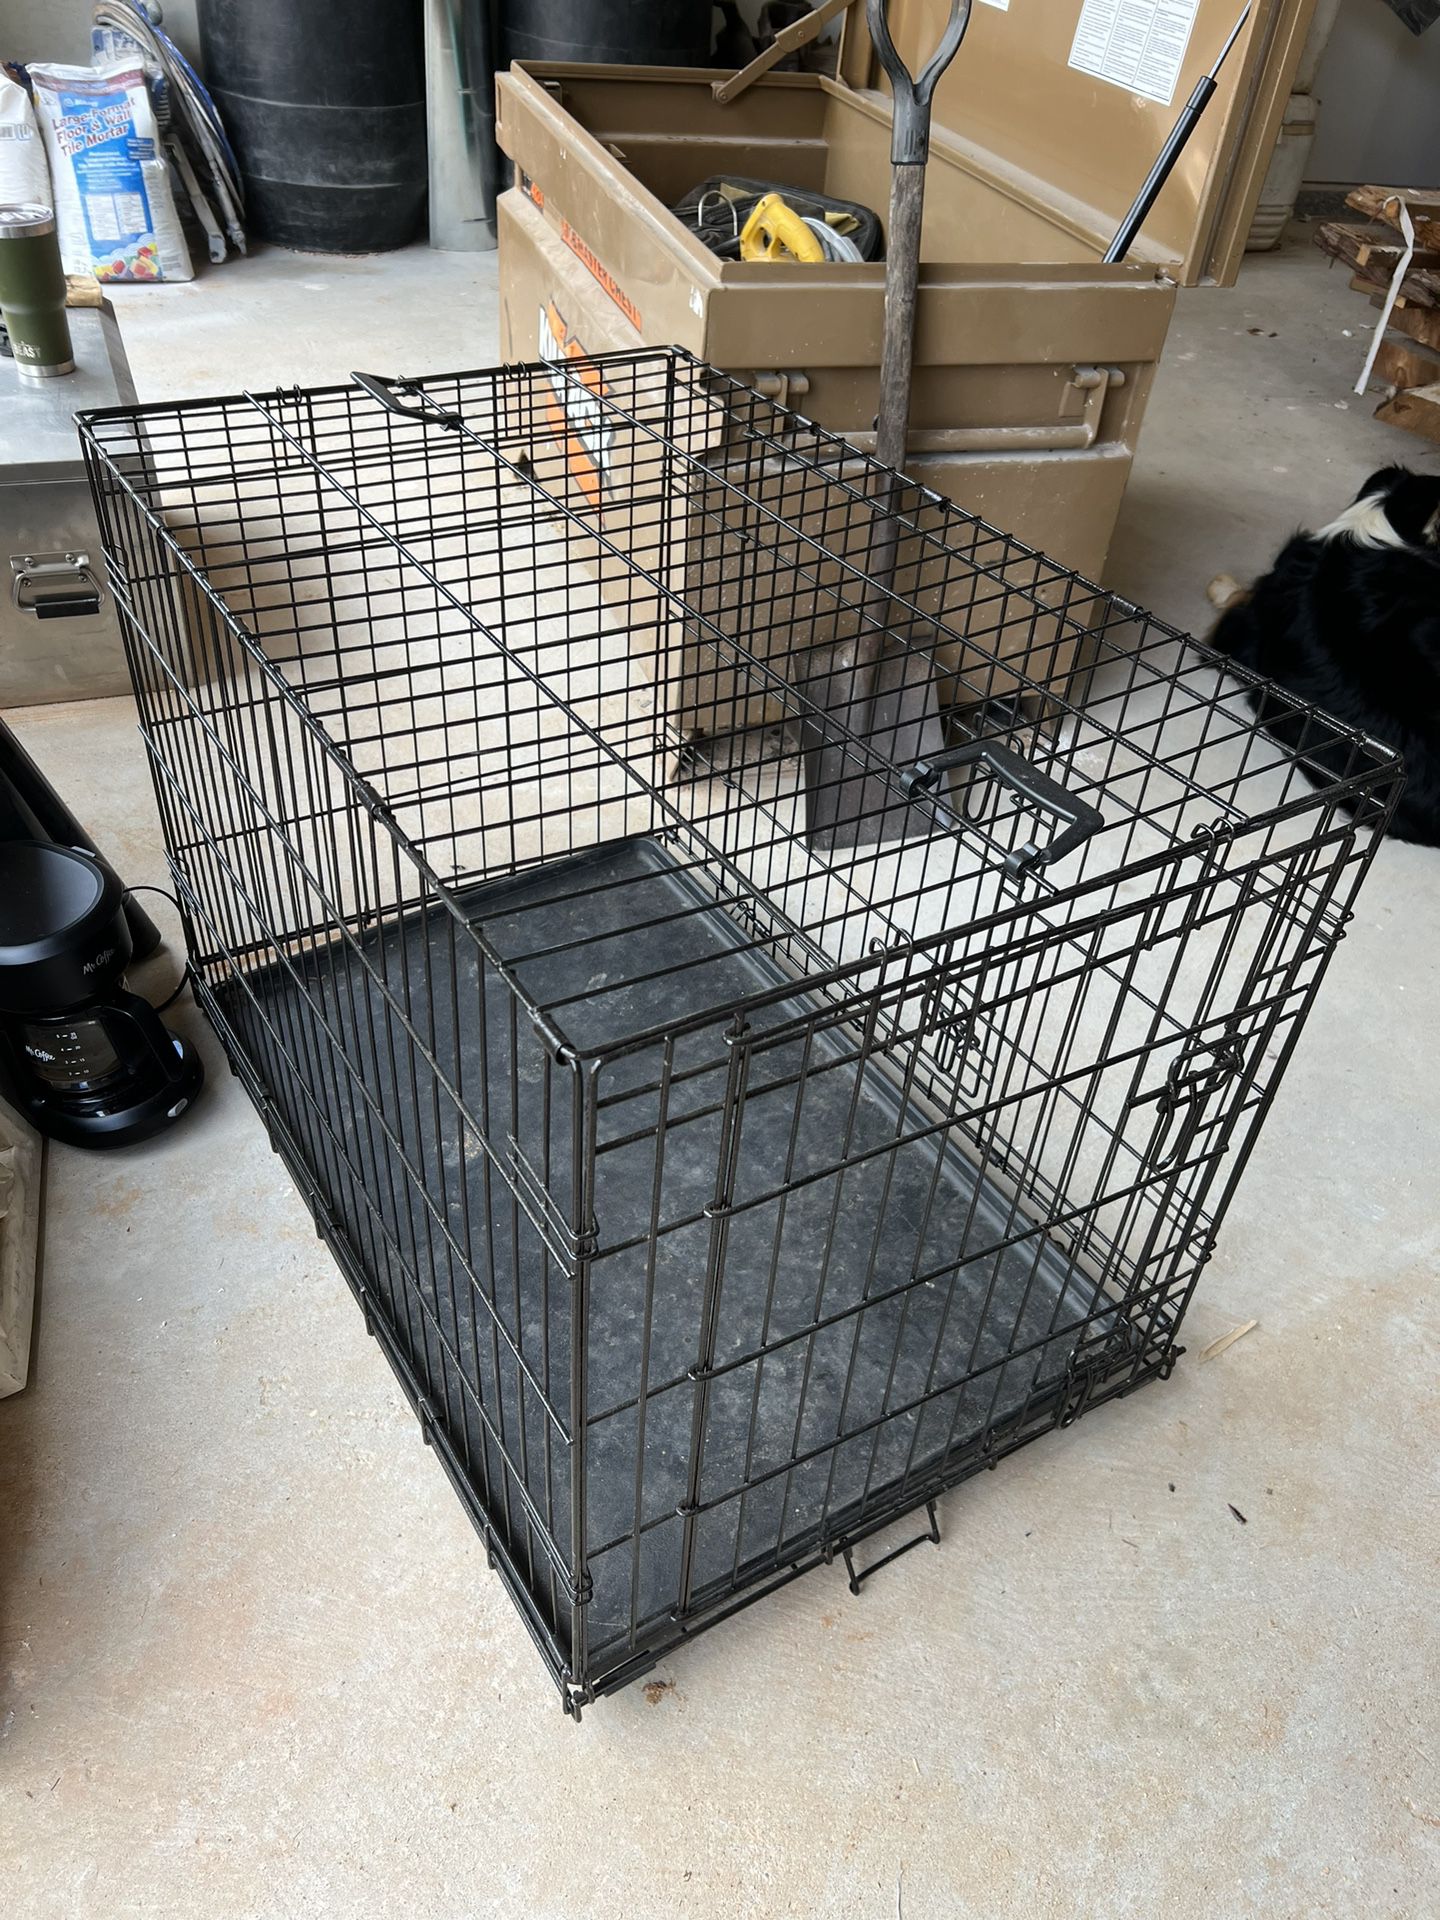 Extra Large Dog Crate Kennel